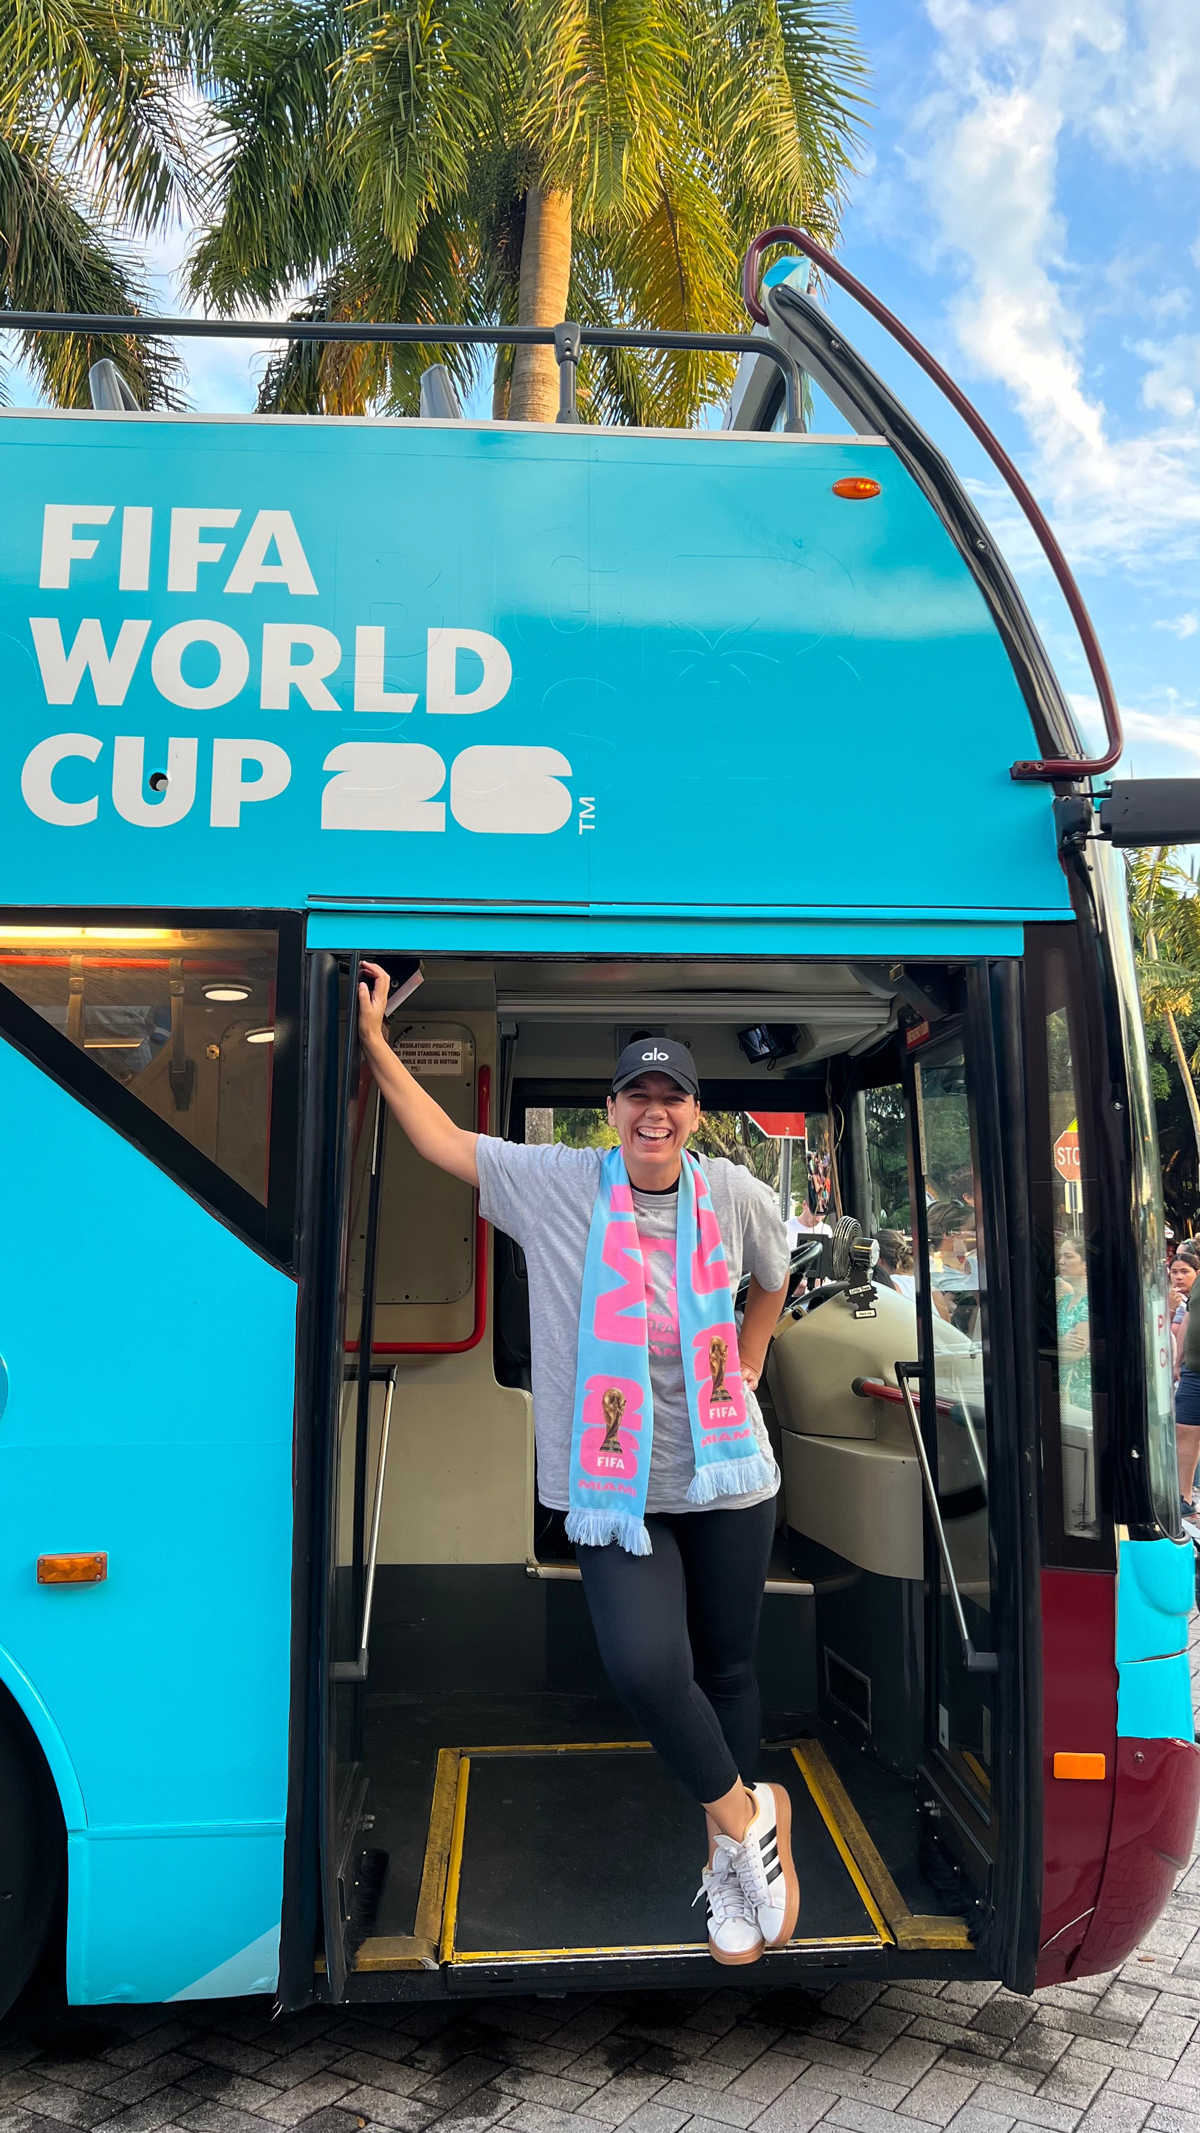 Have you seen the official World Cup 2026 brand and the Miami host city logo? The logo was revealed today with a bus tour around Miami-Dade.